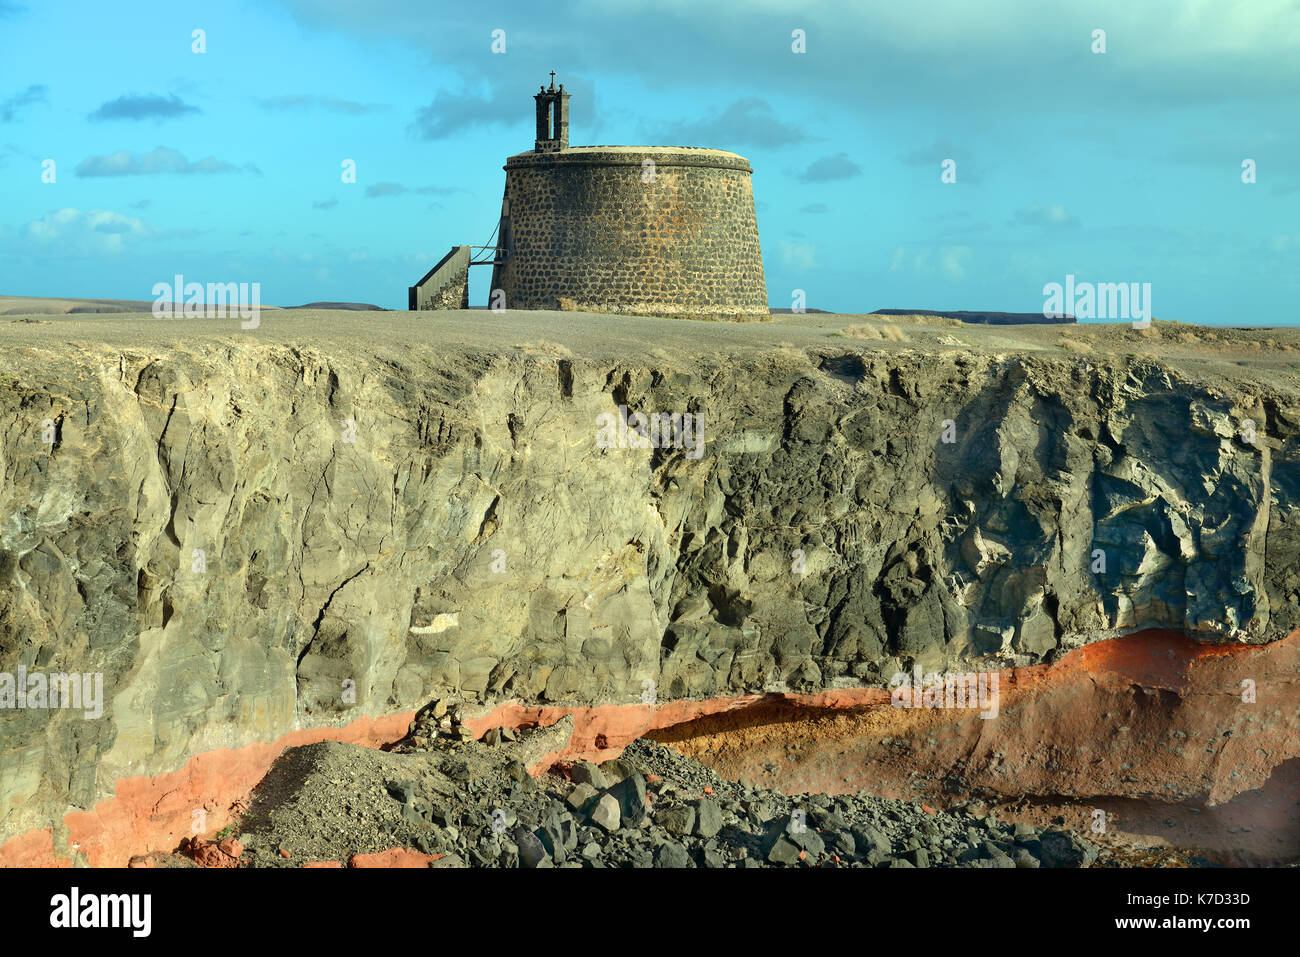 Castillo de las Coloradas is a watchtower in Lanzarote. It stands on the headland of Punta del Aquila and was built between 1741 and 1744. Stock Photo